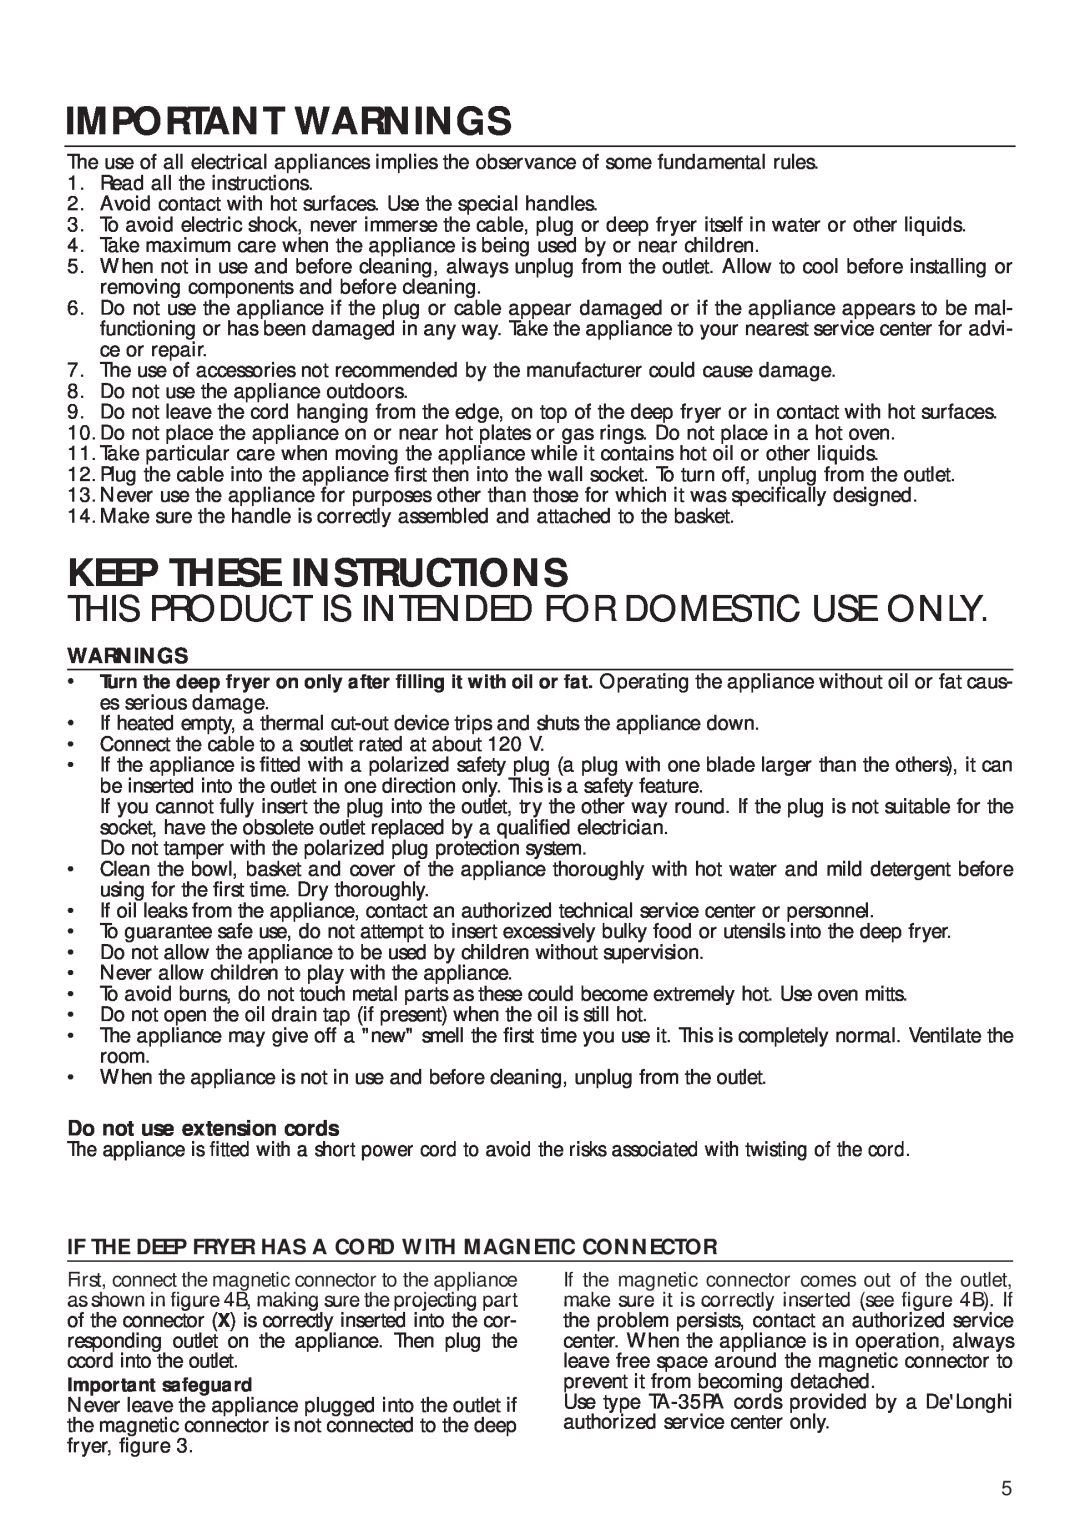 DeLonghi D14427DZ manual Important Warnings, Keep These Instructions, Do not use extension cords 